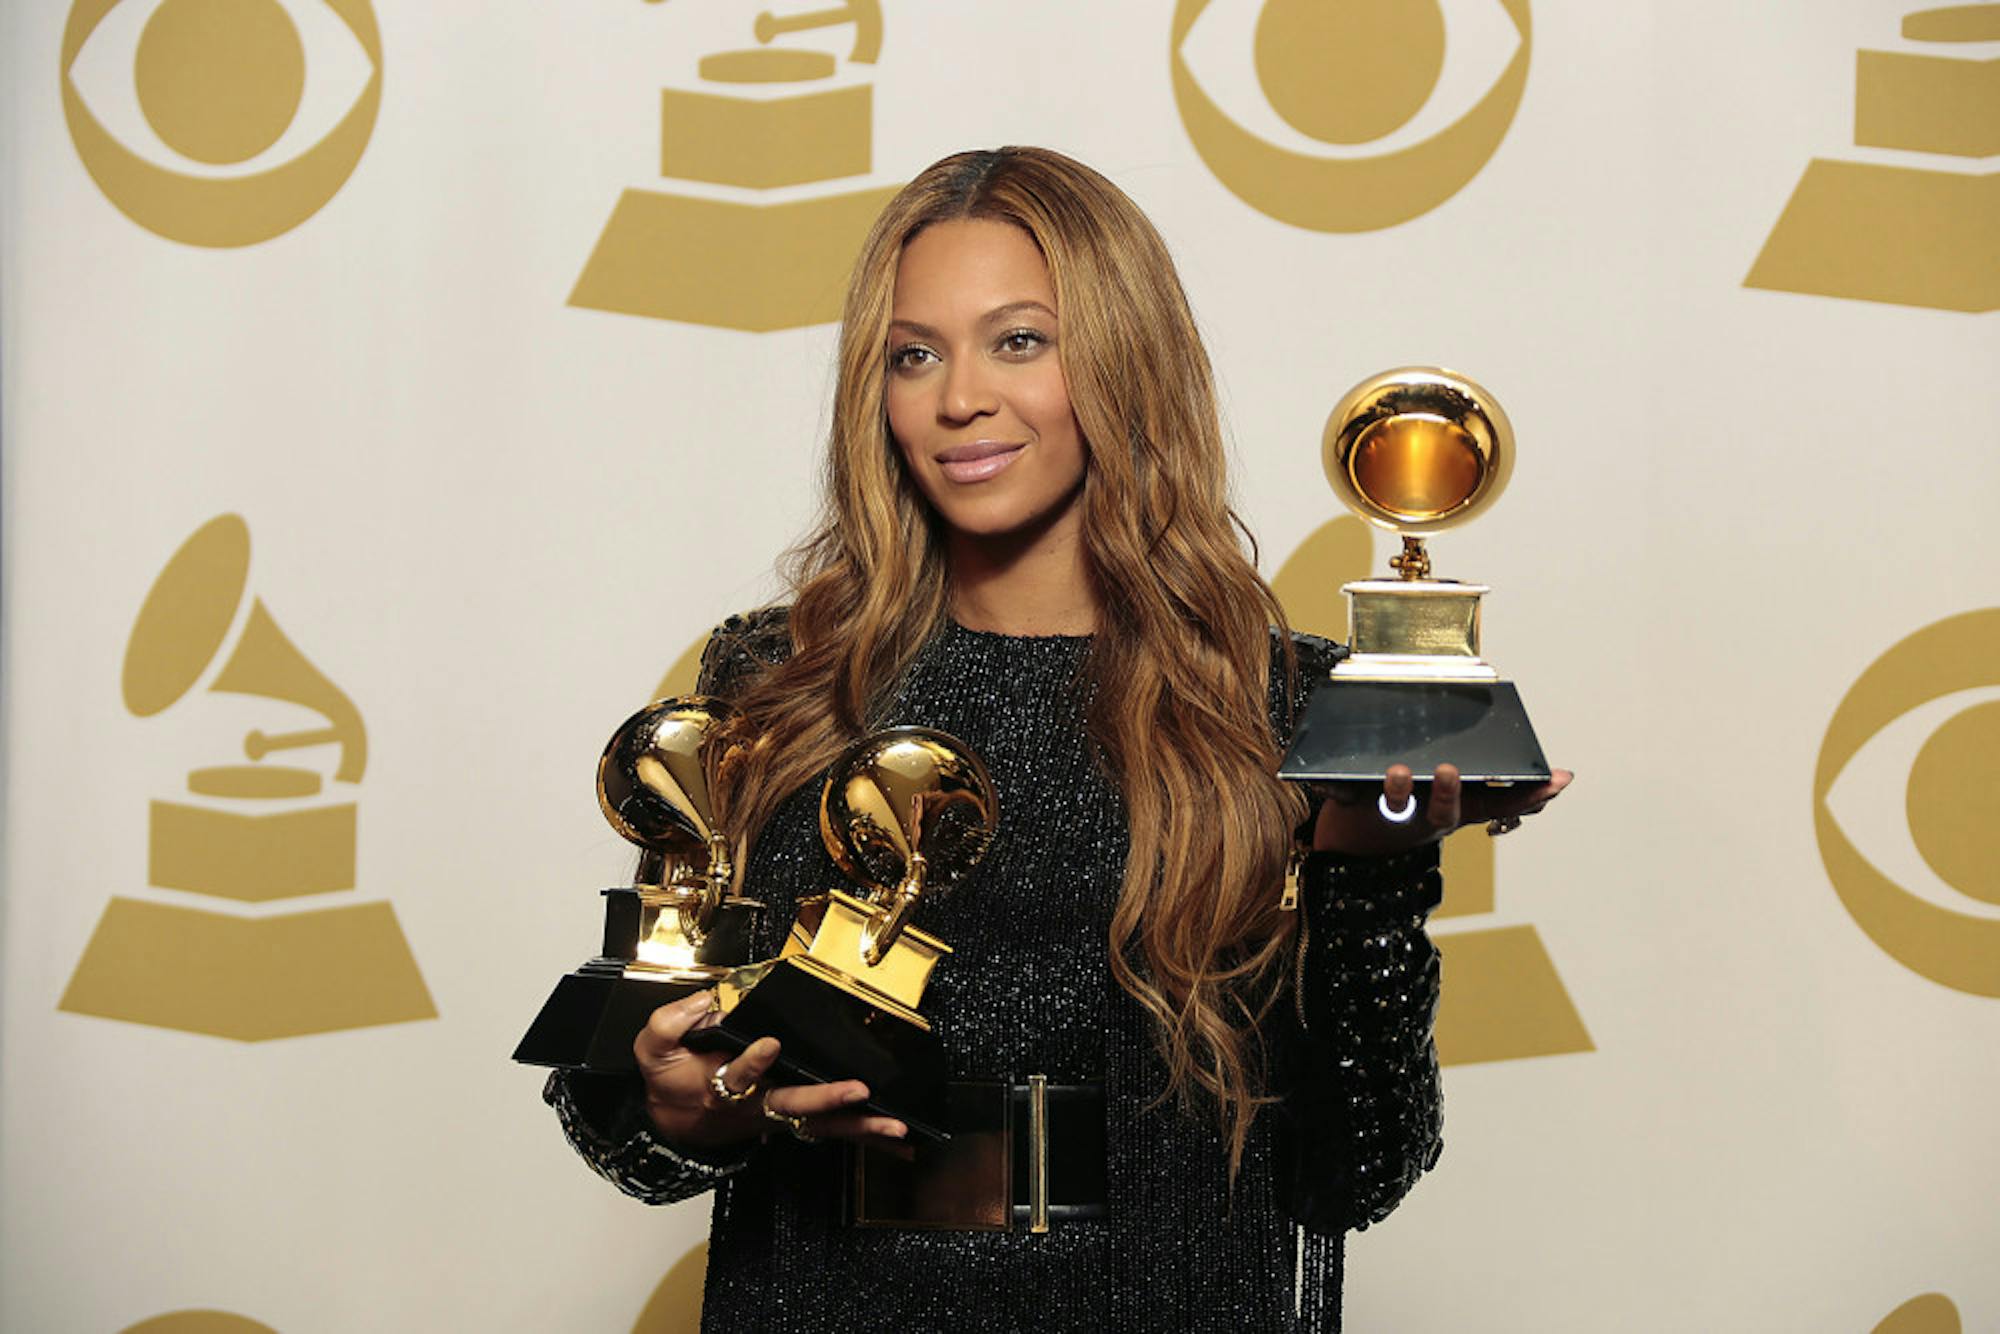 Why Beyoncé deserved the Grammy, part 2 - The Tufts Daily